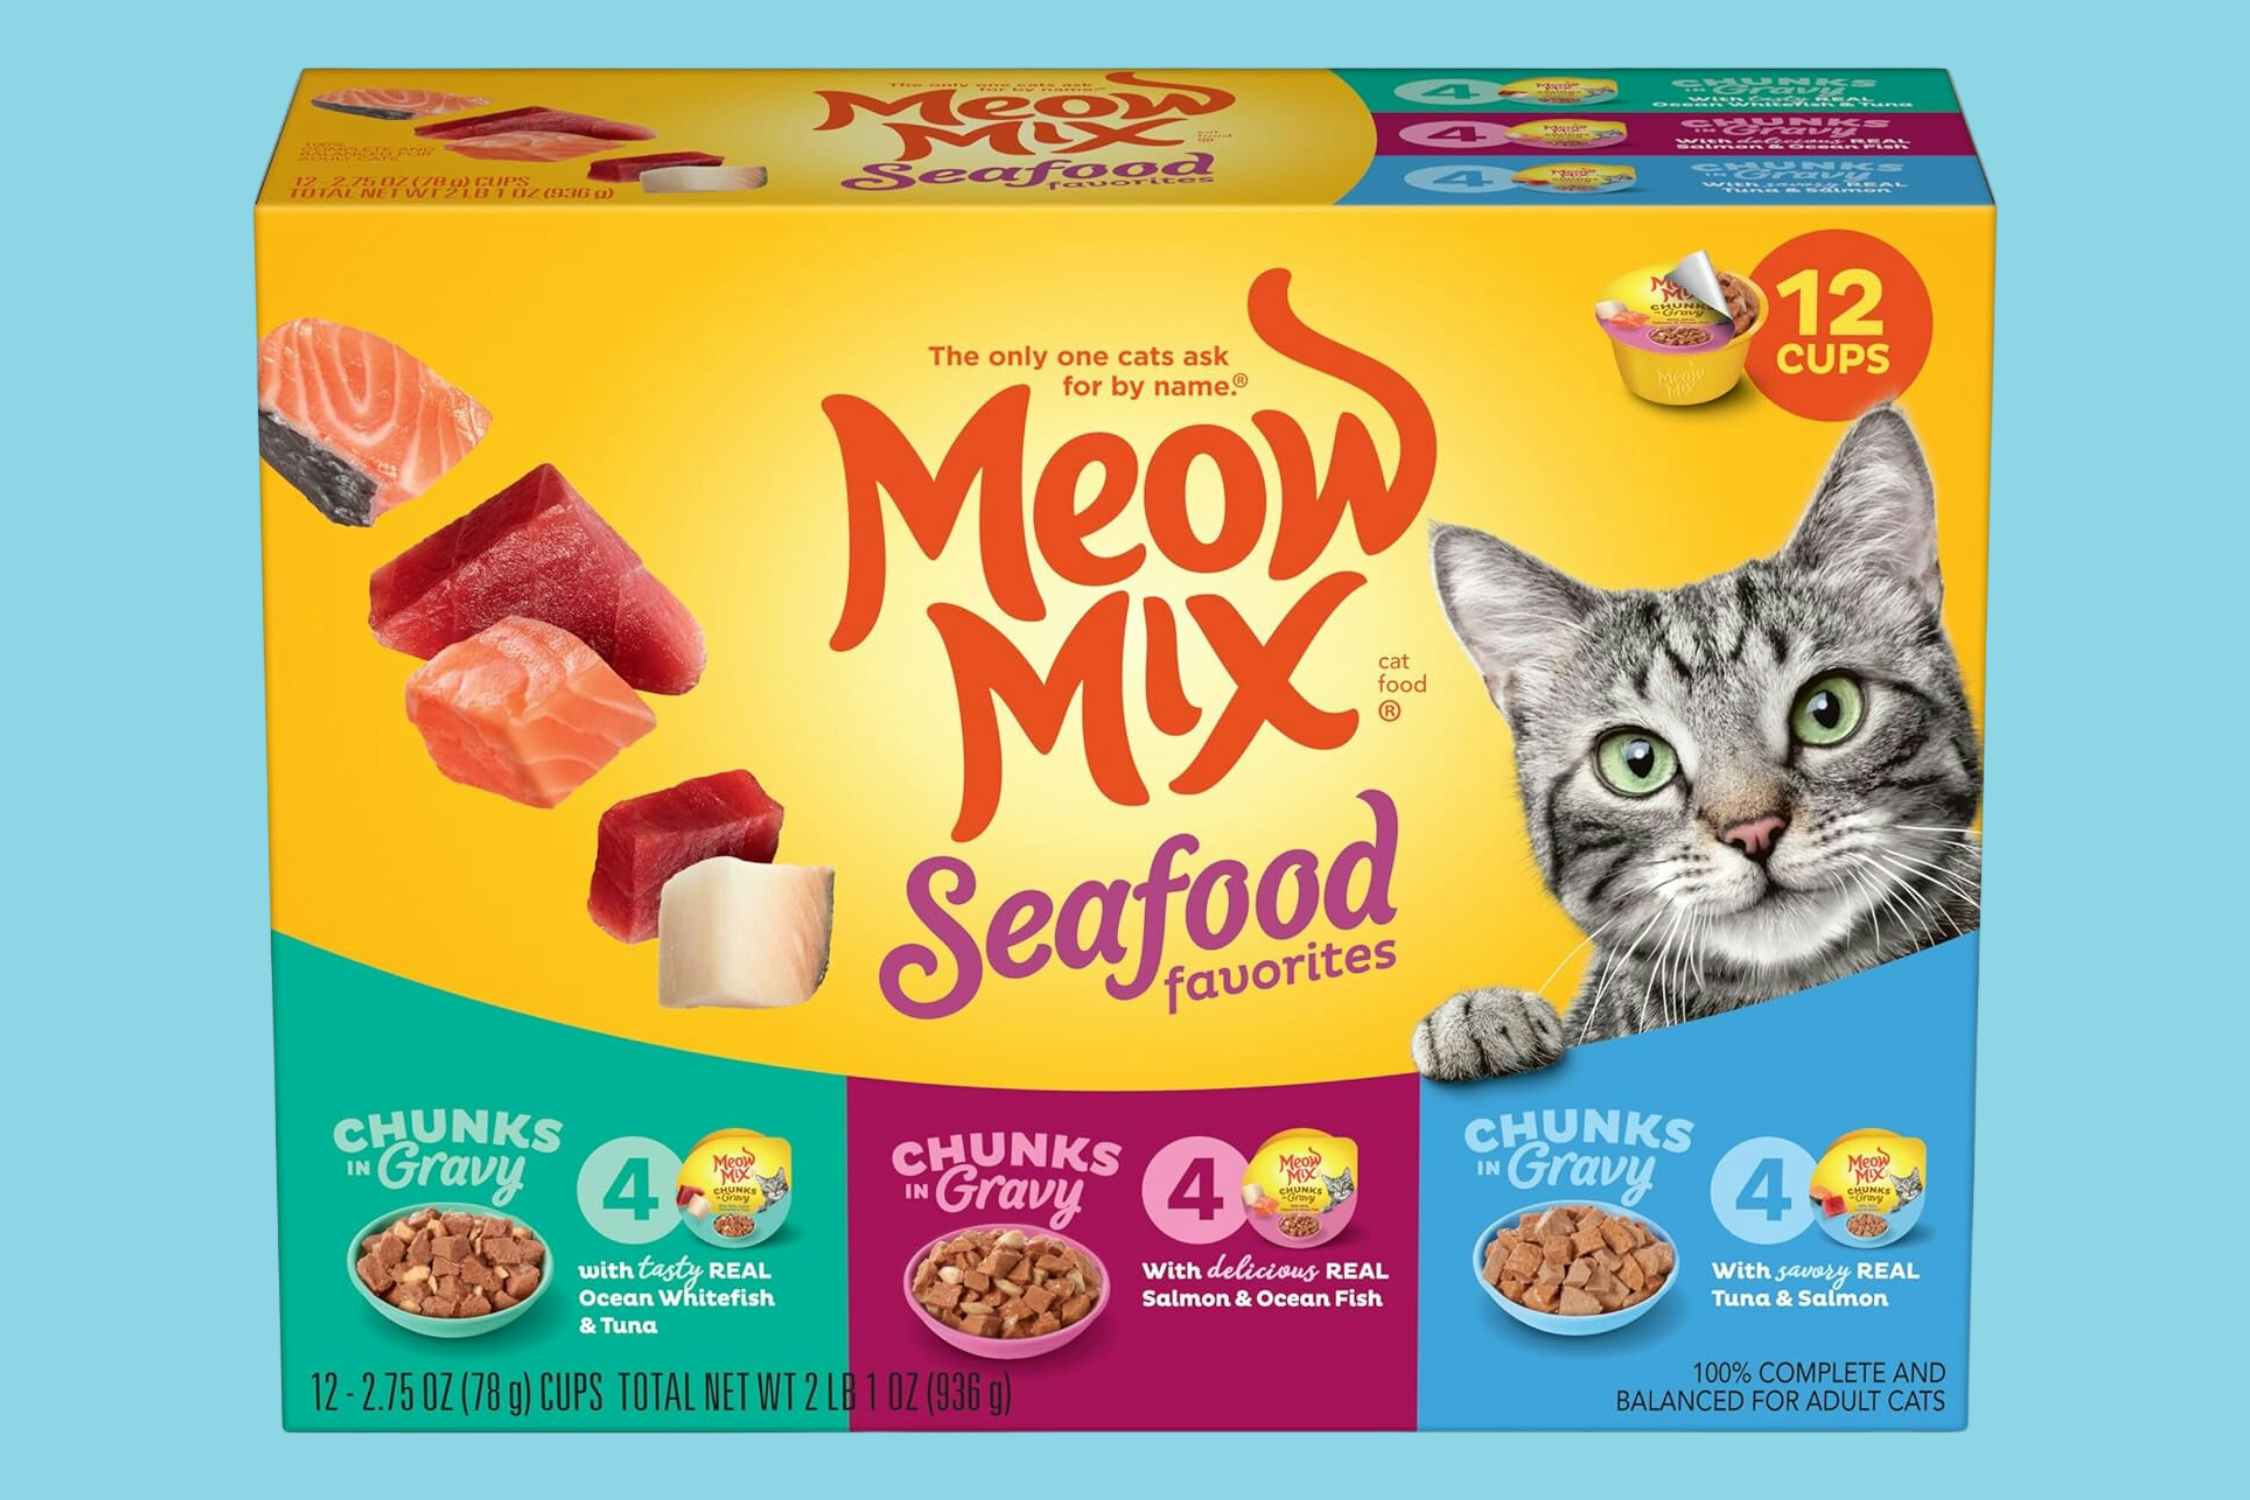 Meow Mix Seafood Wet Cat Food 12-Pack, Just $5 on Amazon